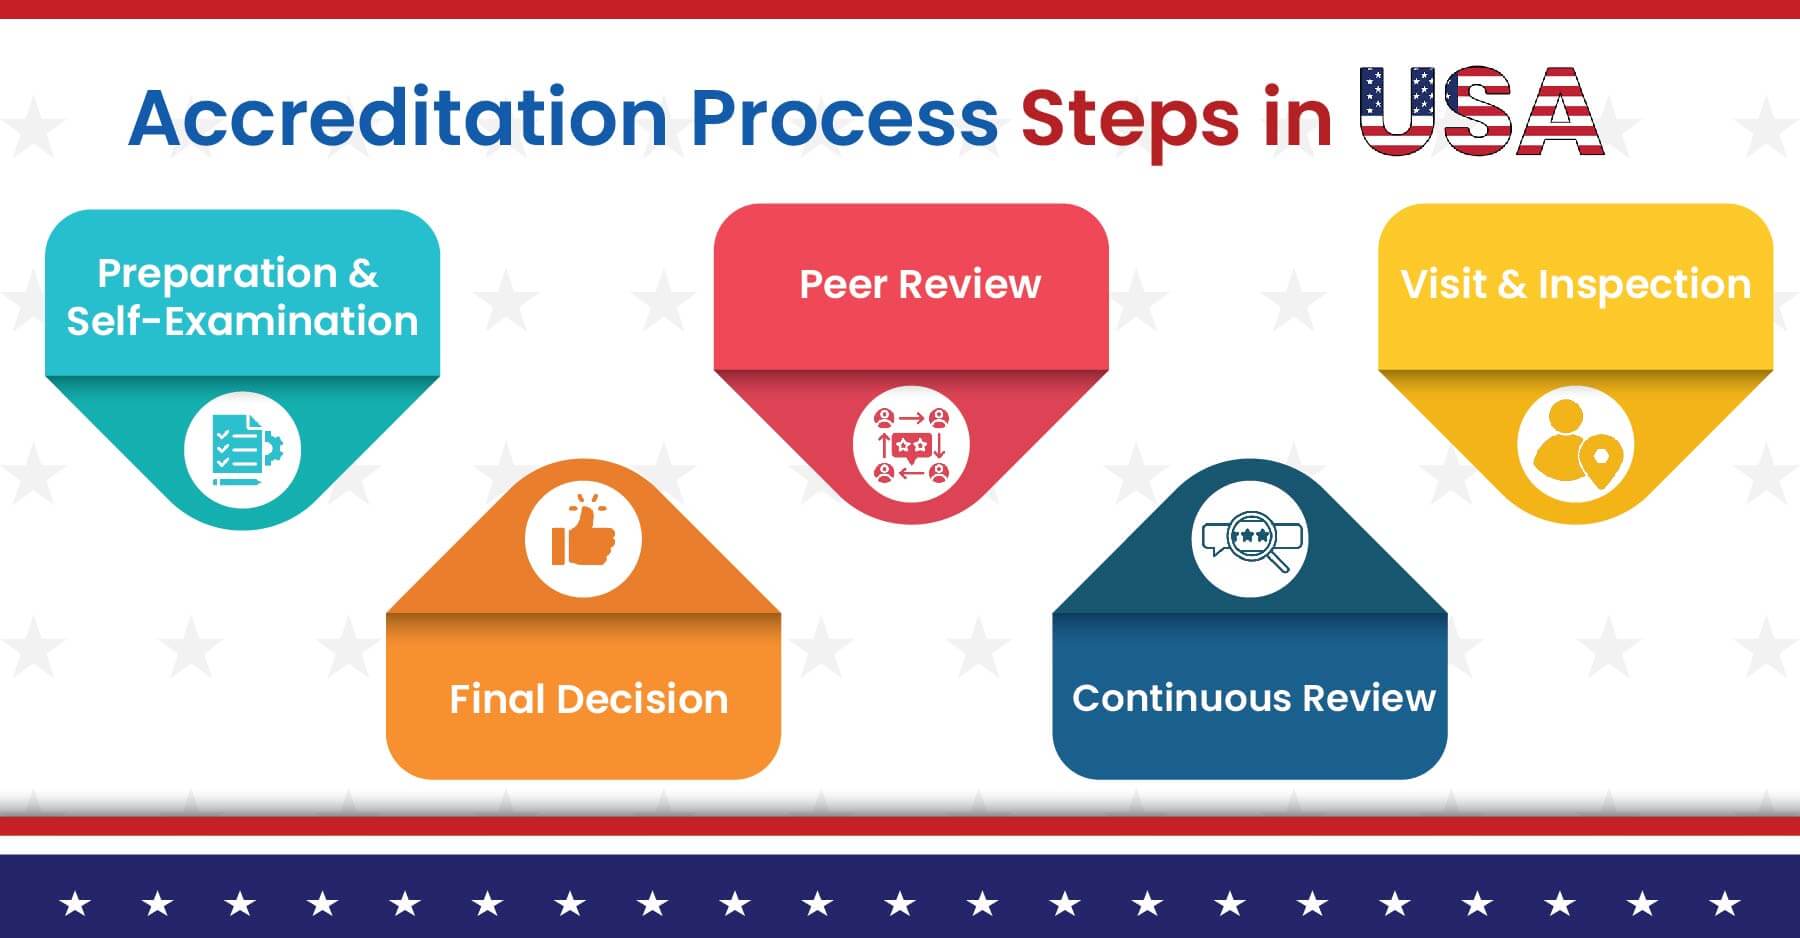 Learn About the Accreditation Process in the USA with this Gradding.com Guide.